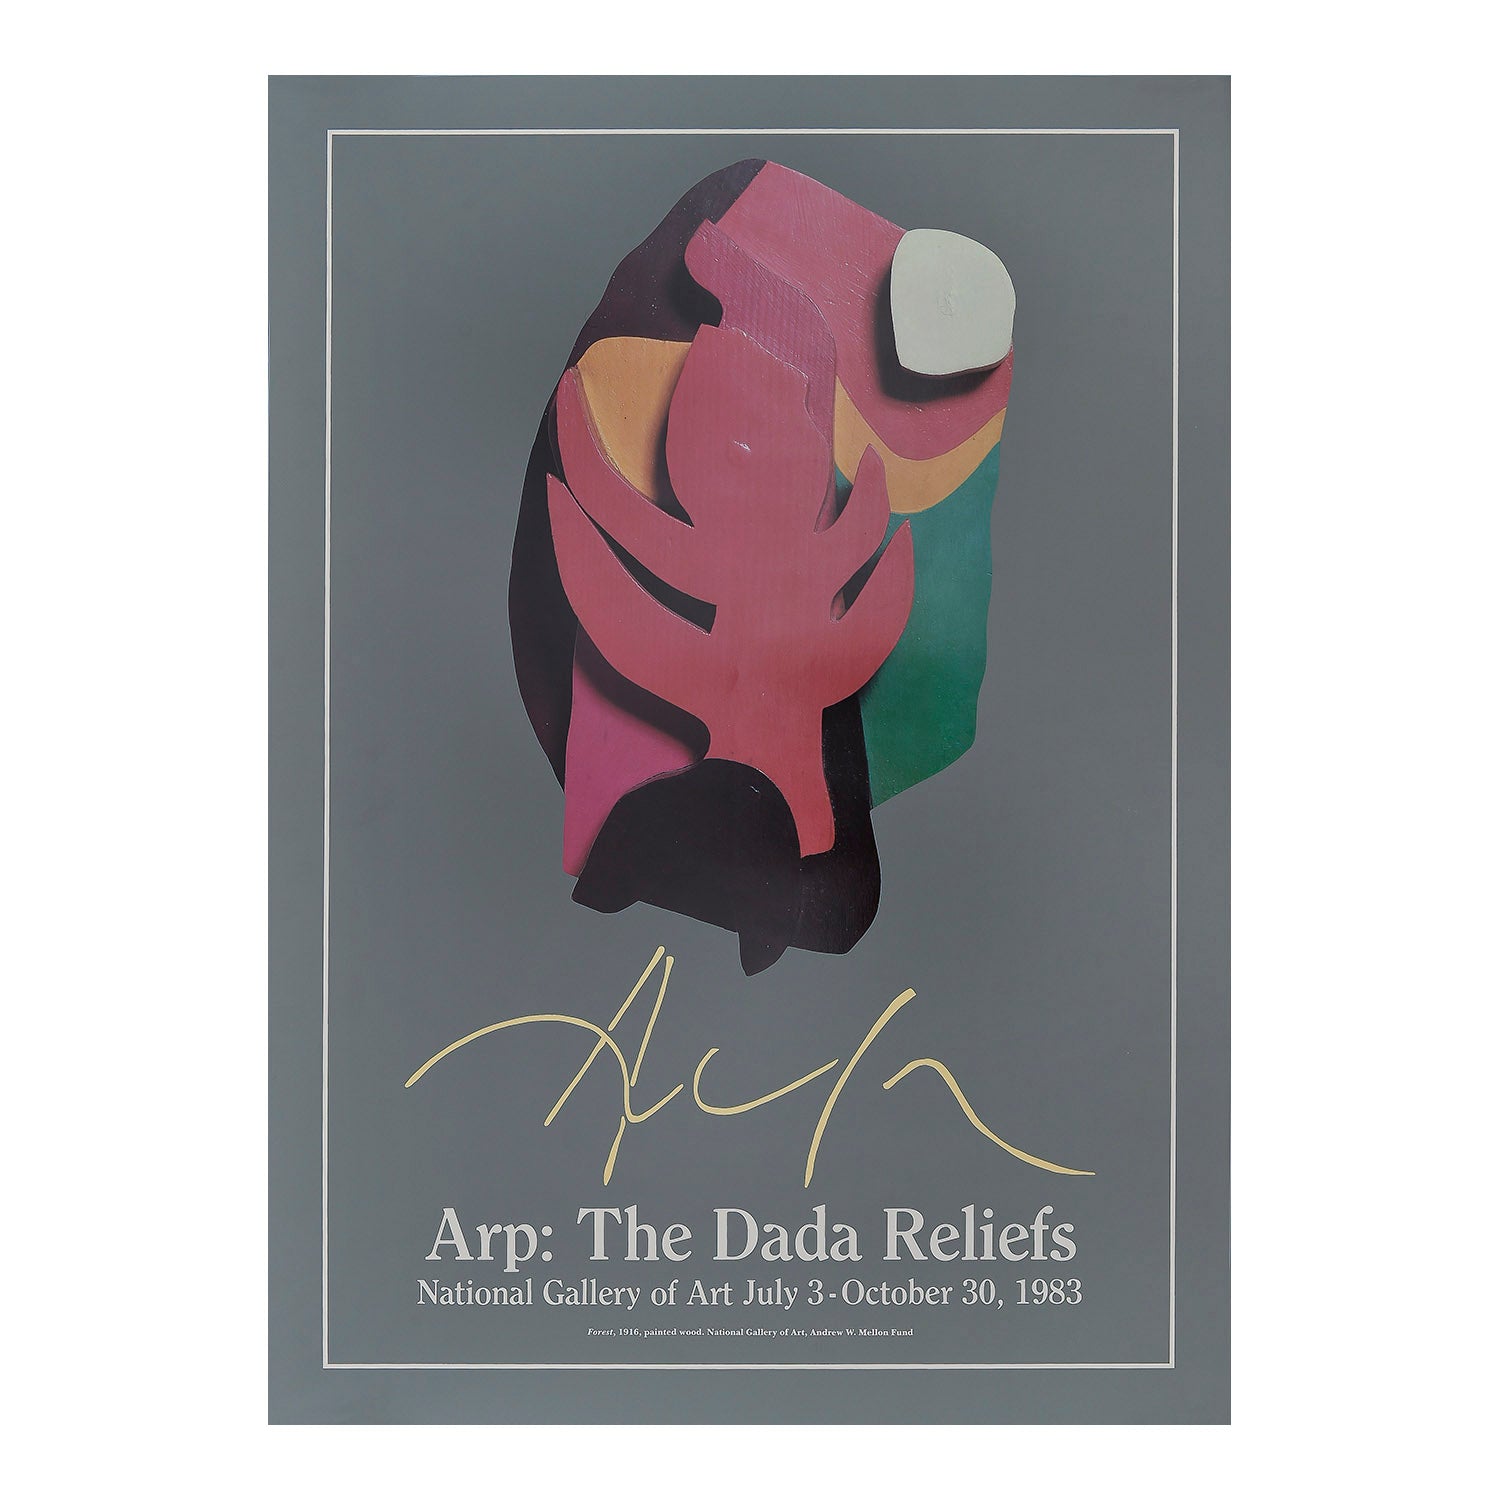 art exhibition poster, Arp: The Dada Reliefs, National Gallery of Art, 1983. The design features a painted wood relief Forest (1916) by the German-French sculptor and painter Hans Peter Wilhelm Arp (better known as Jean Arp in English